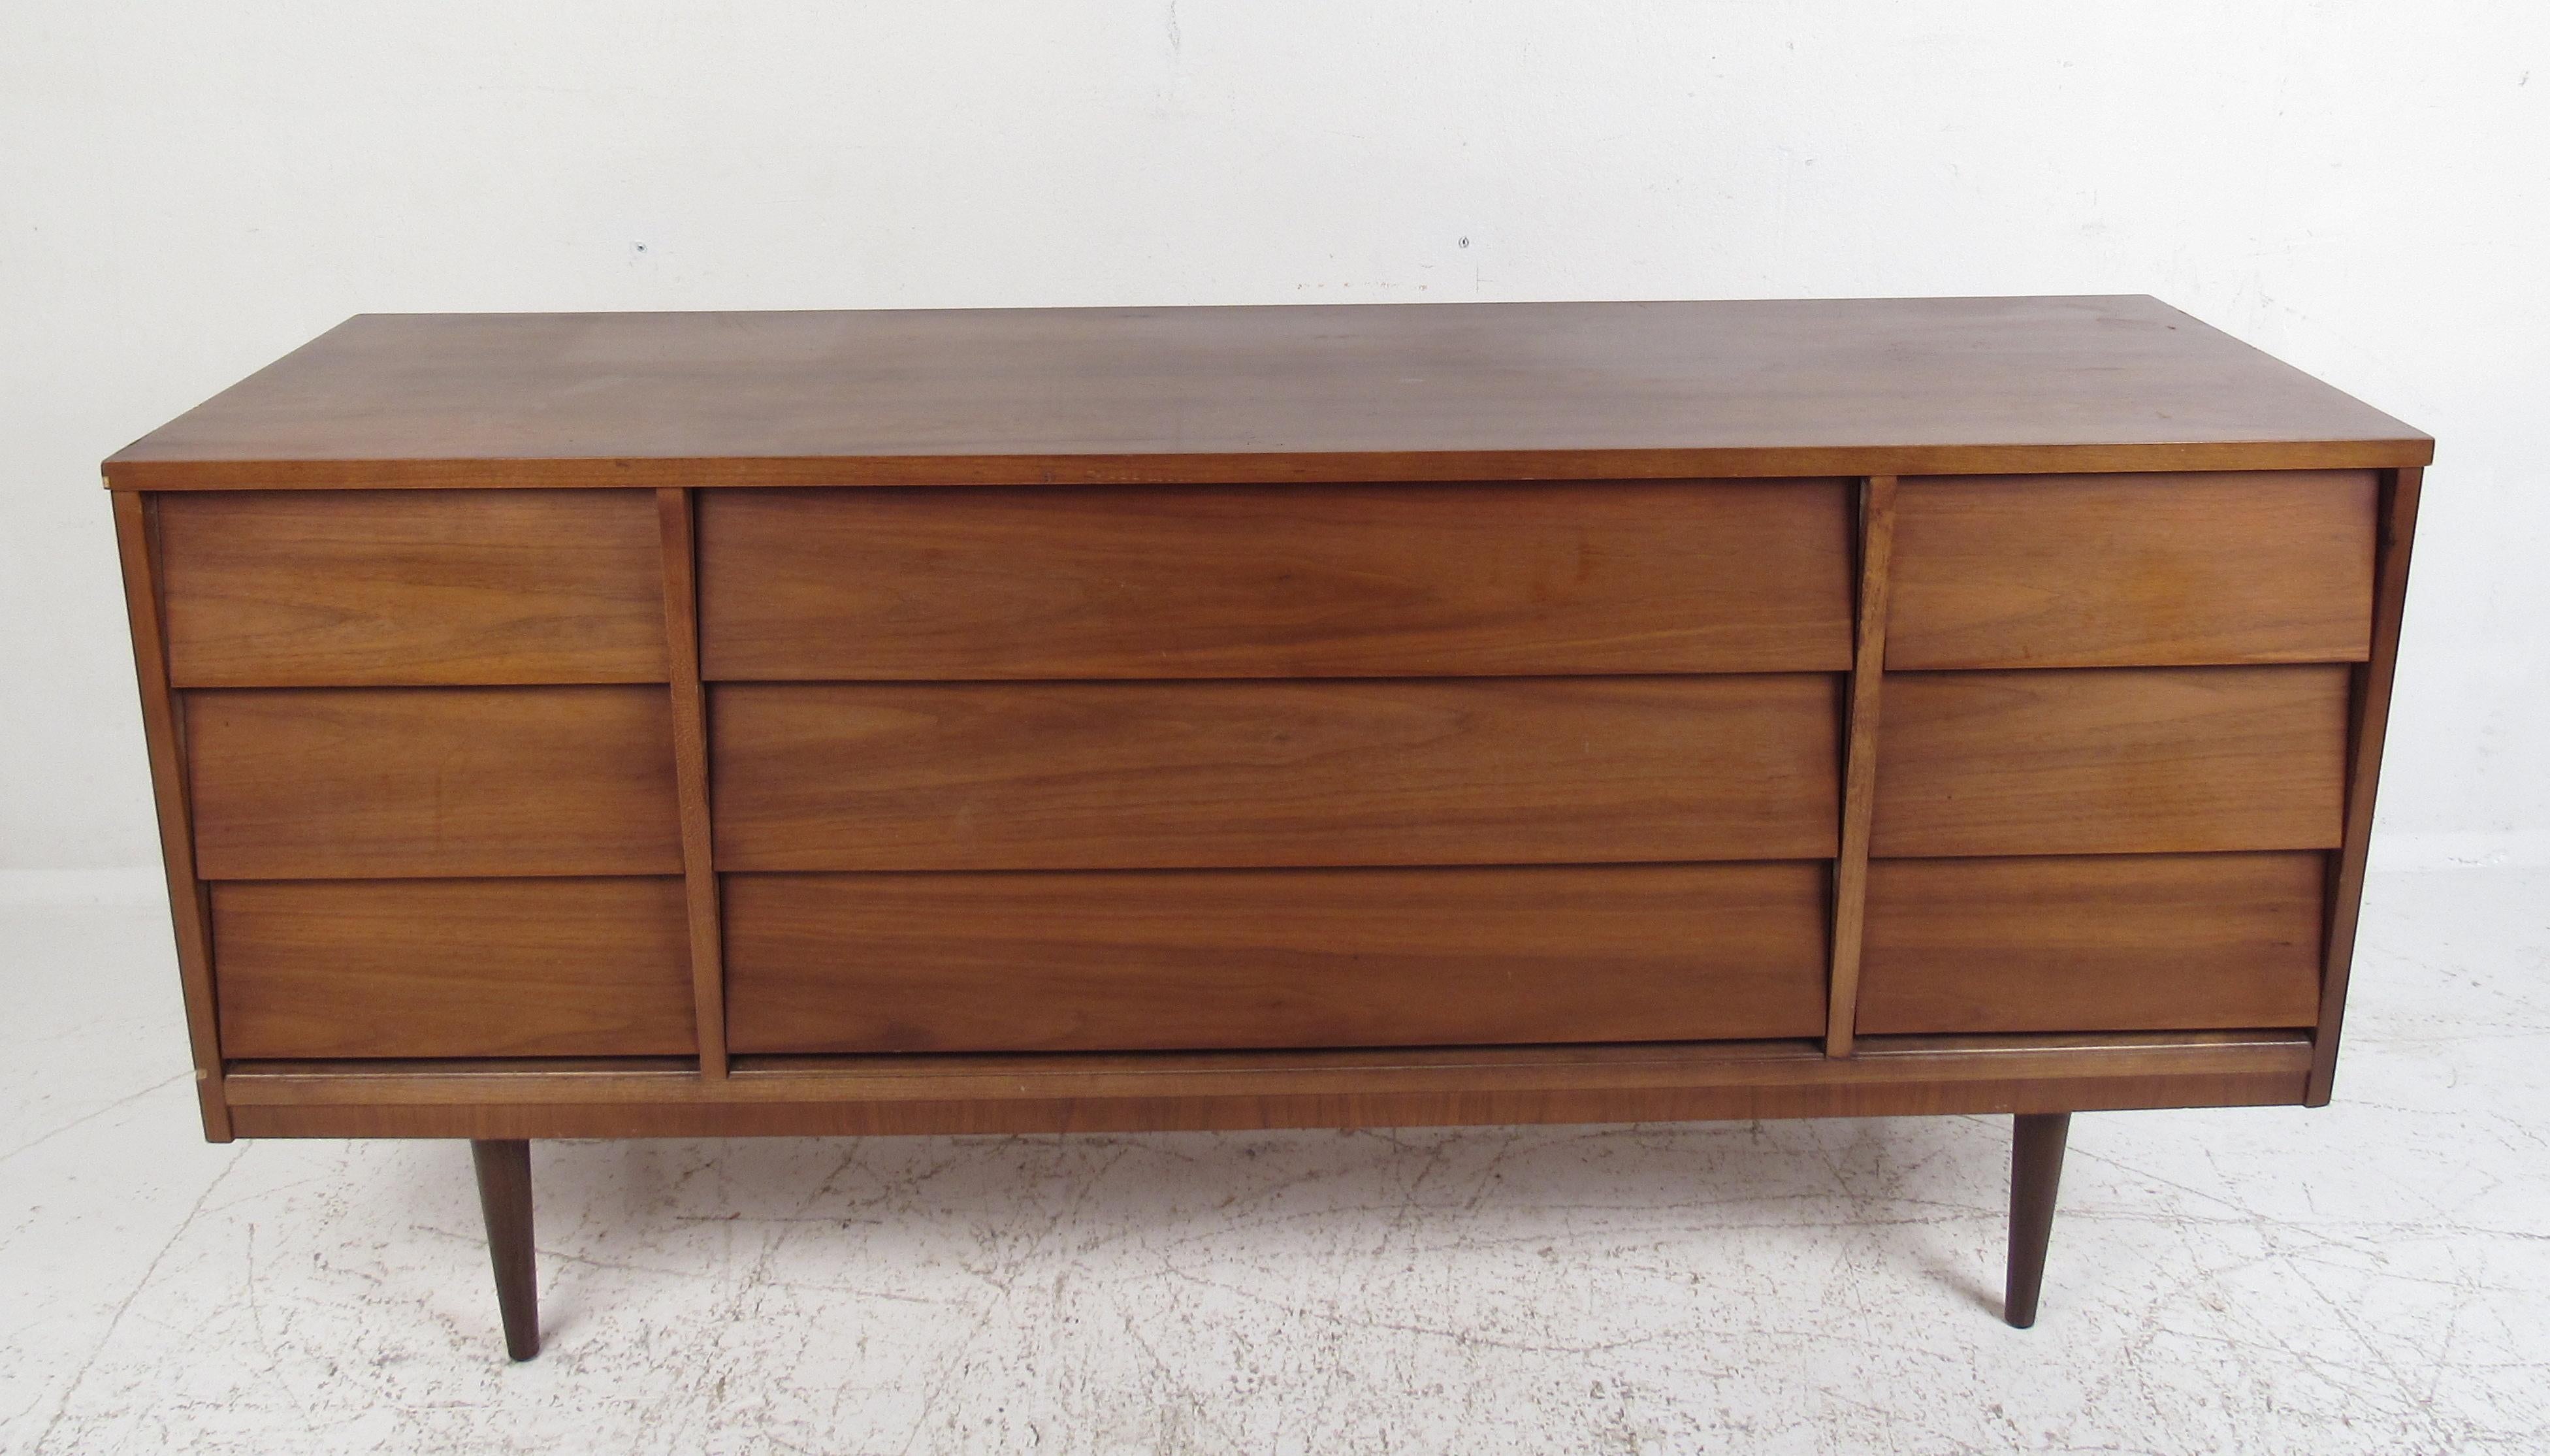 This beautiful pair of vintage modern dressers offer plenty of room for storage within their many drawers. A simple, yet stylish design with straight lines and a charming vintage walnut finish. The unusual hidden louvered drawer pulls and stubby